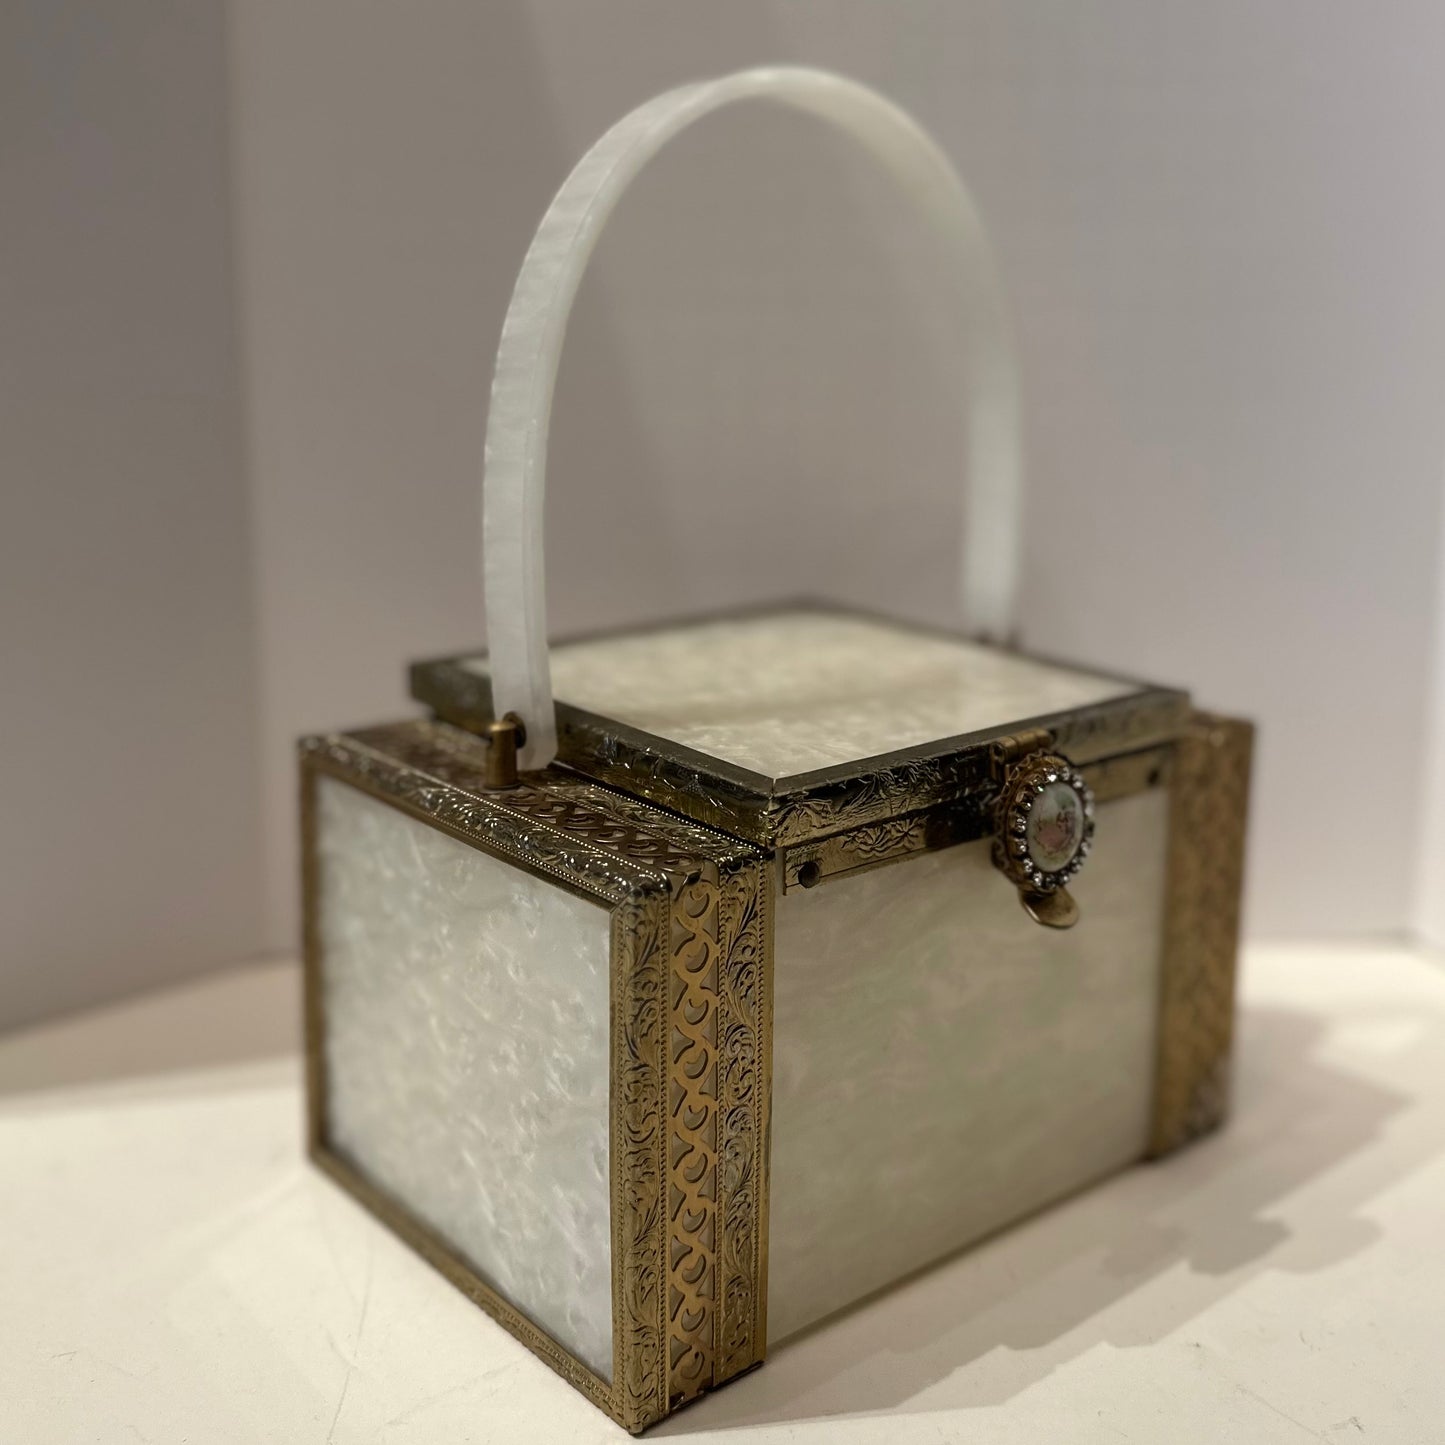 Stunning 1940s White Box Bag w/ Courting Couple Clasp